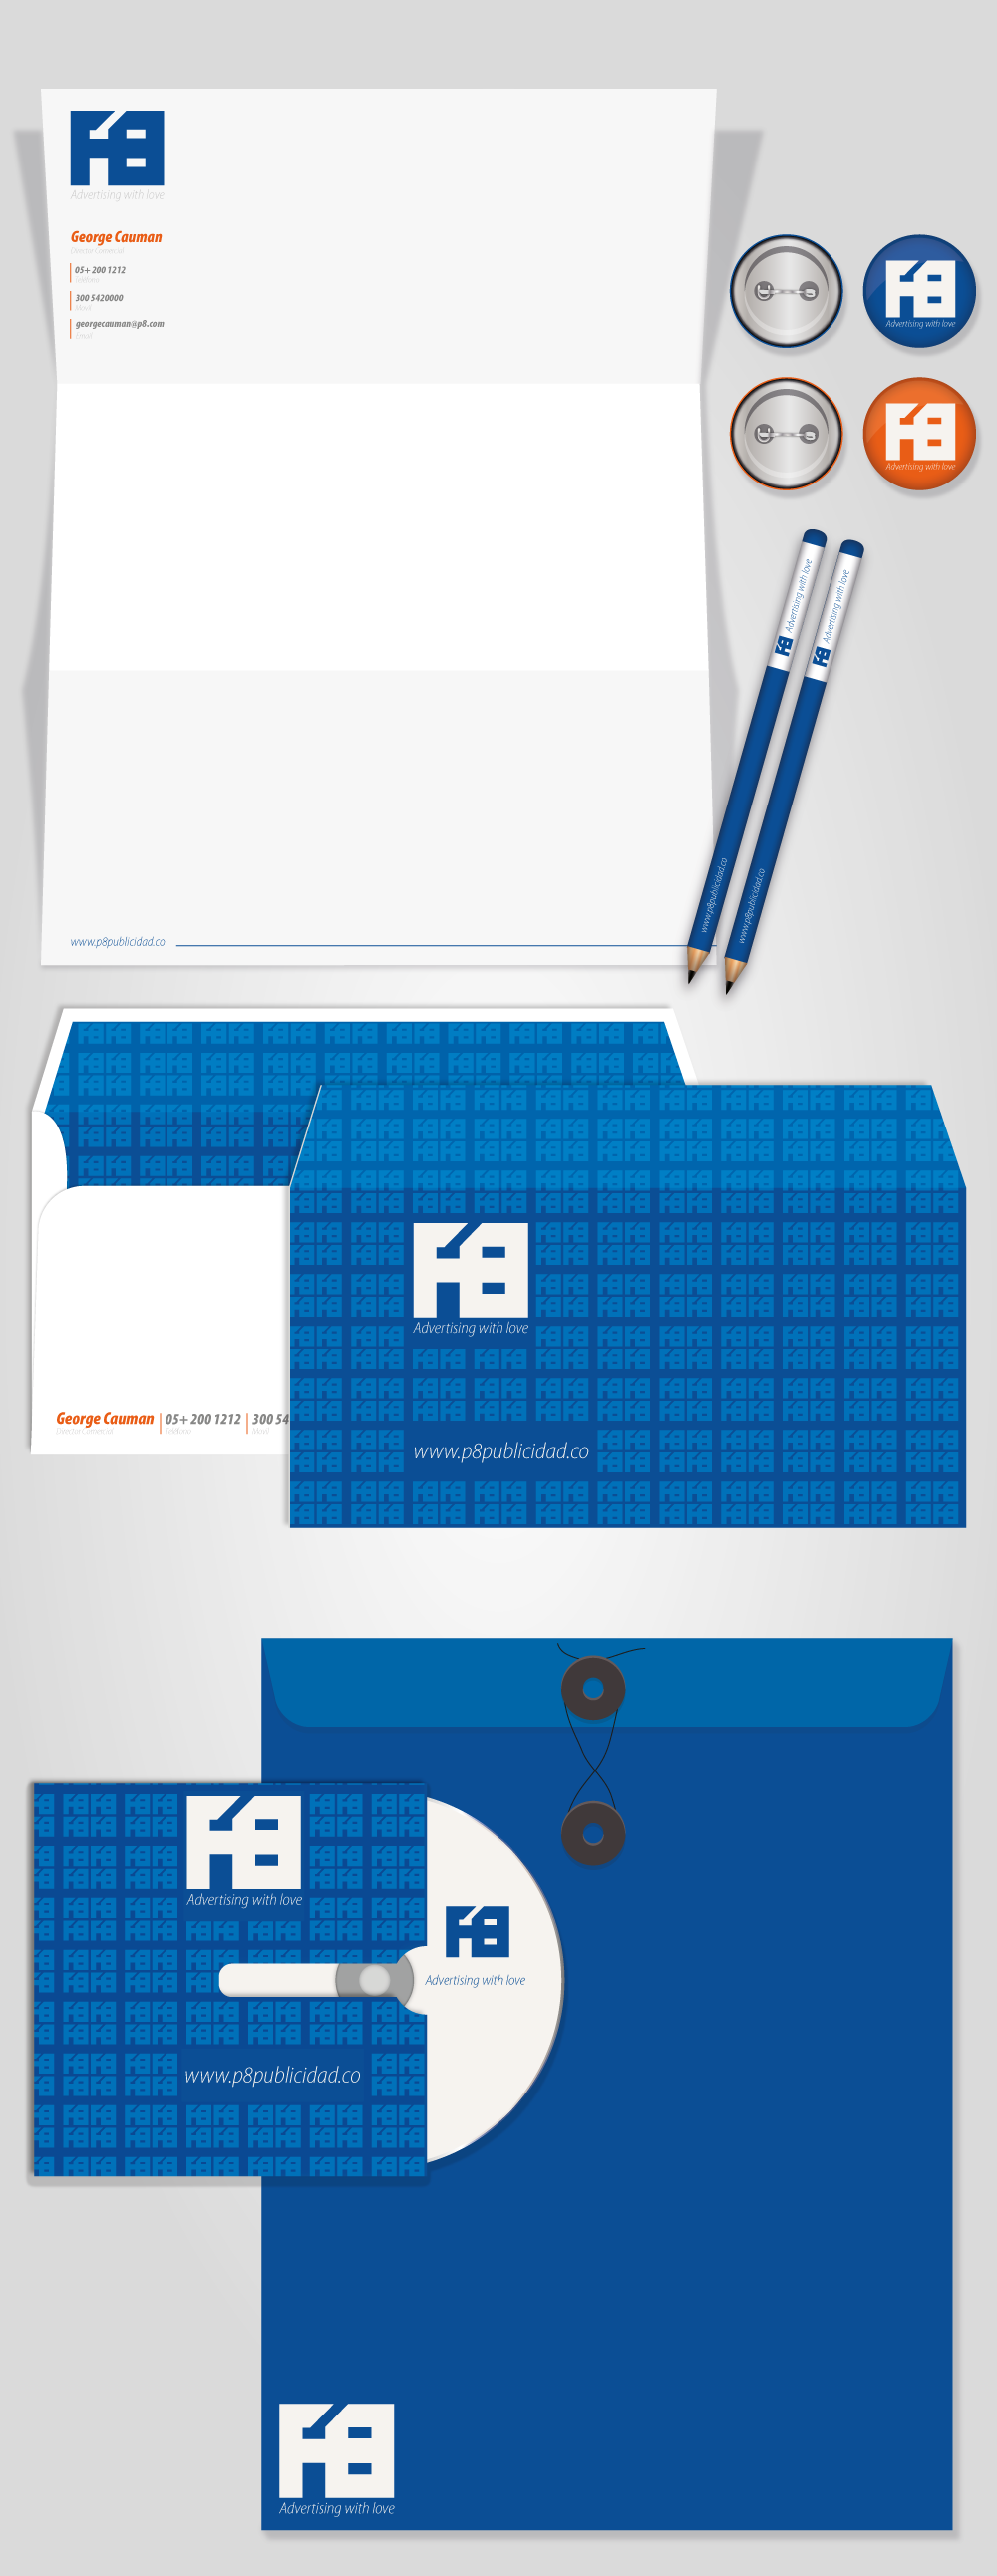 visual design brand desing corporate colombia pattern